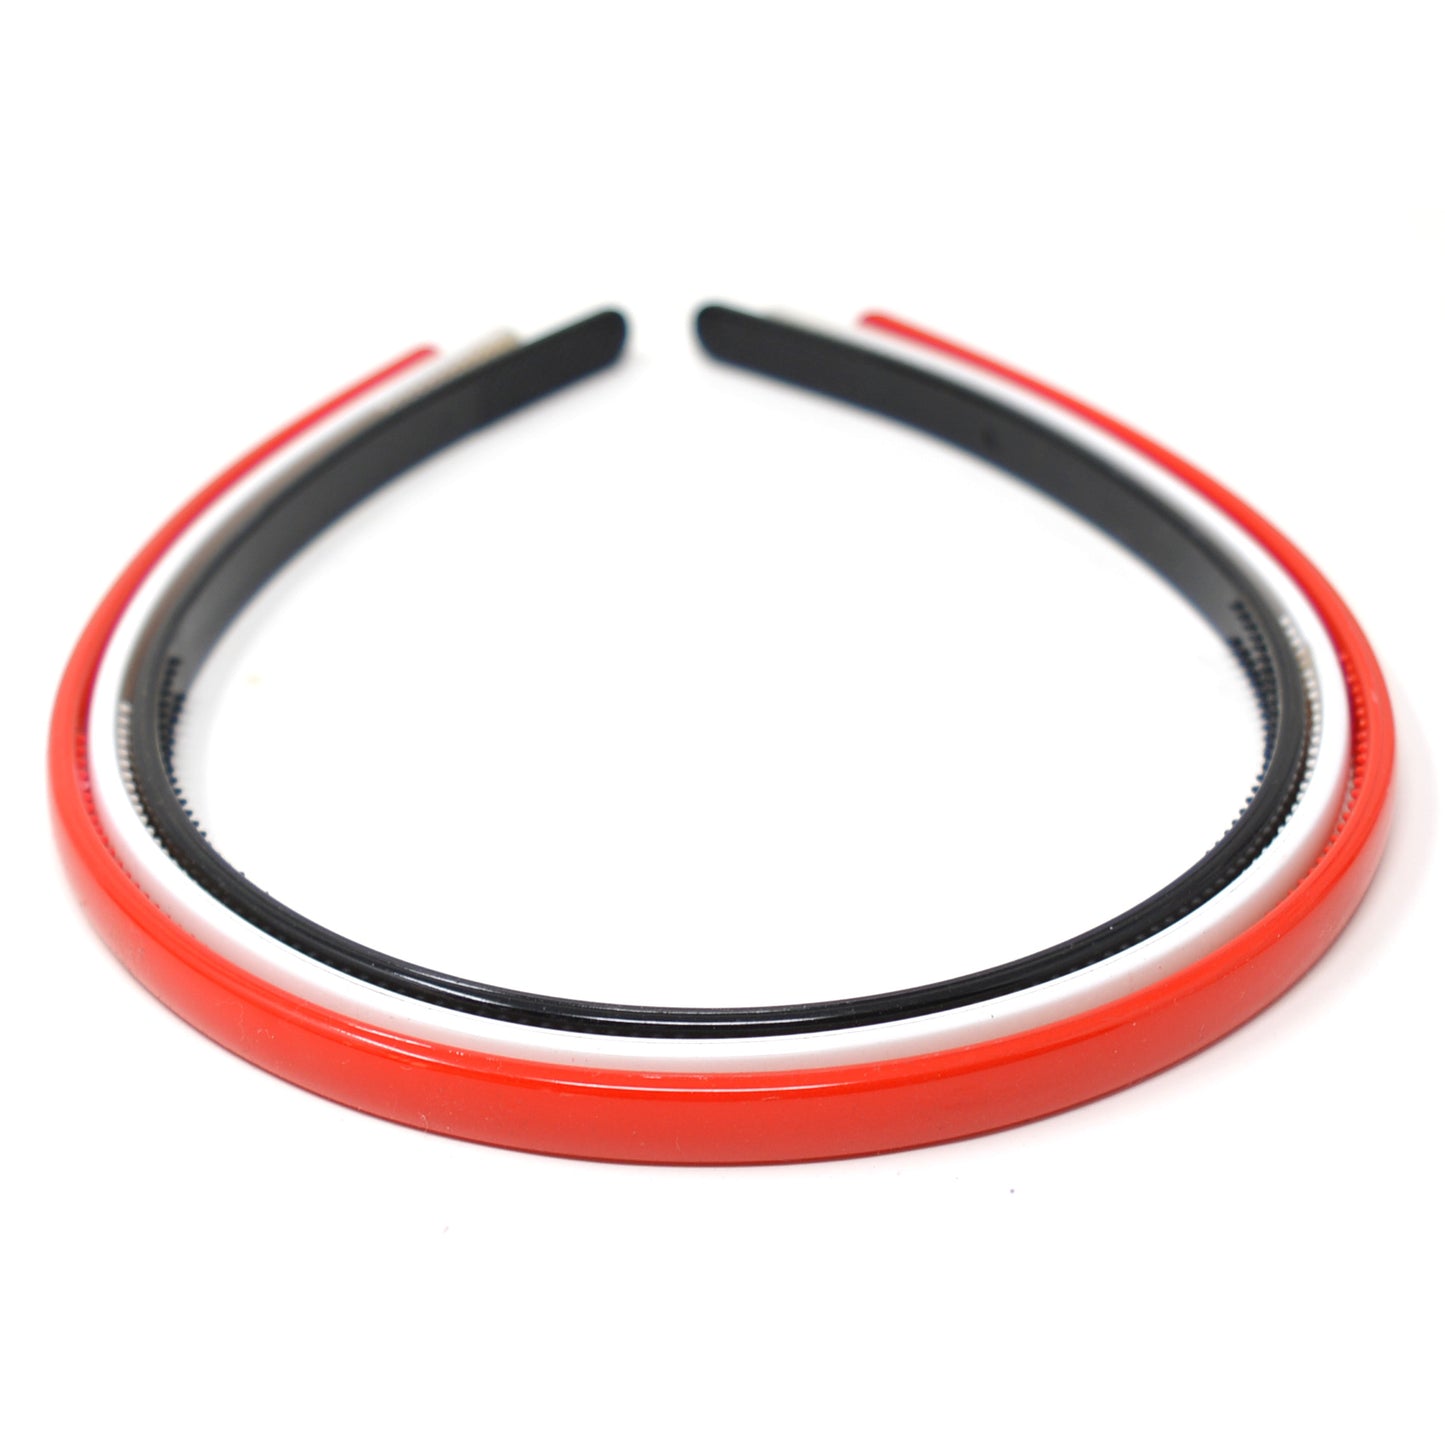 Set of Red, Black and White Premium Sleek Plastic Hairbands for Girls and Women (008)